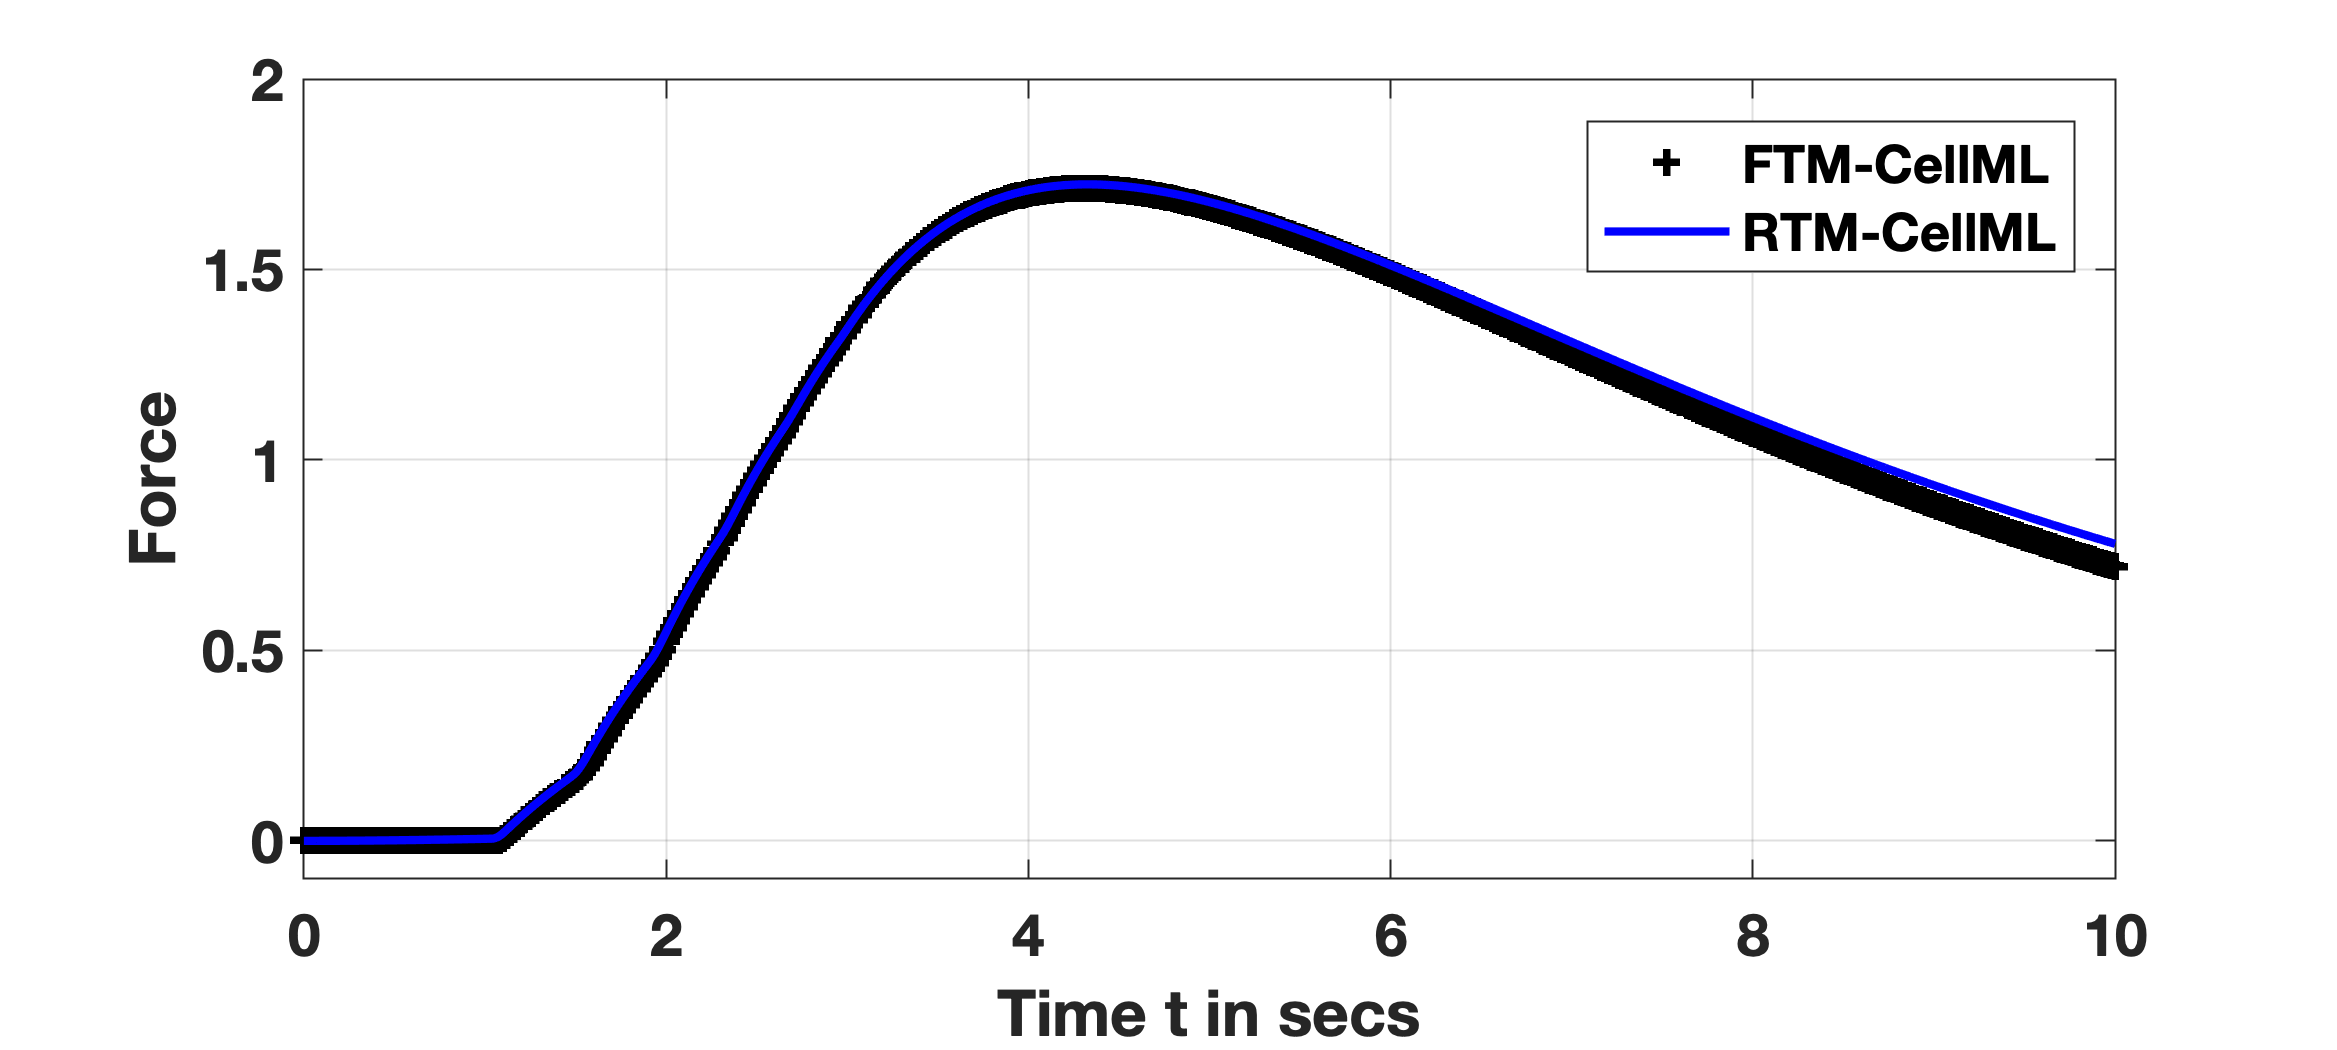 SSP Reproduction: FTM and RTM results: black ’+’ and blue trace, respectively. All initial conditions are identical between them with an applied stimulus, I_{stim} of -0.5 pA/pF for two seconds initiated at time t=1.0 secs.